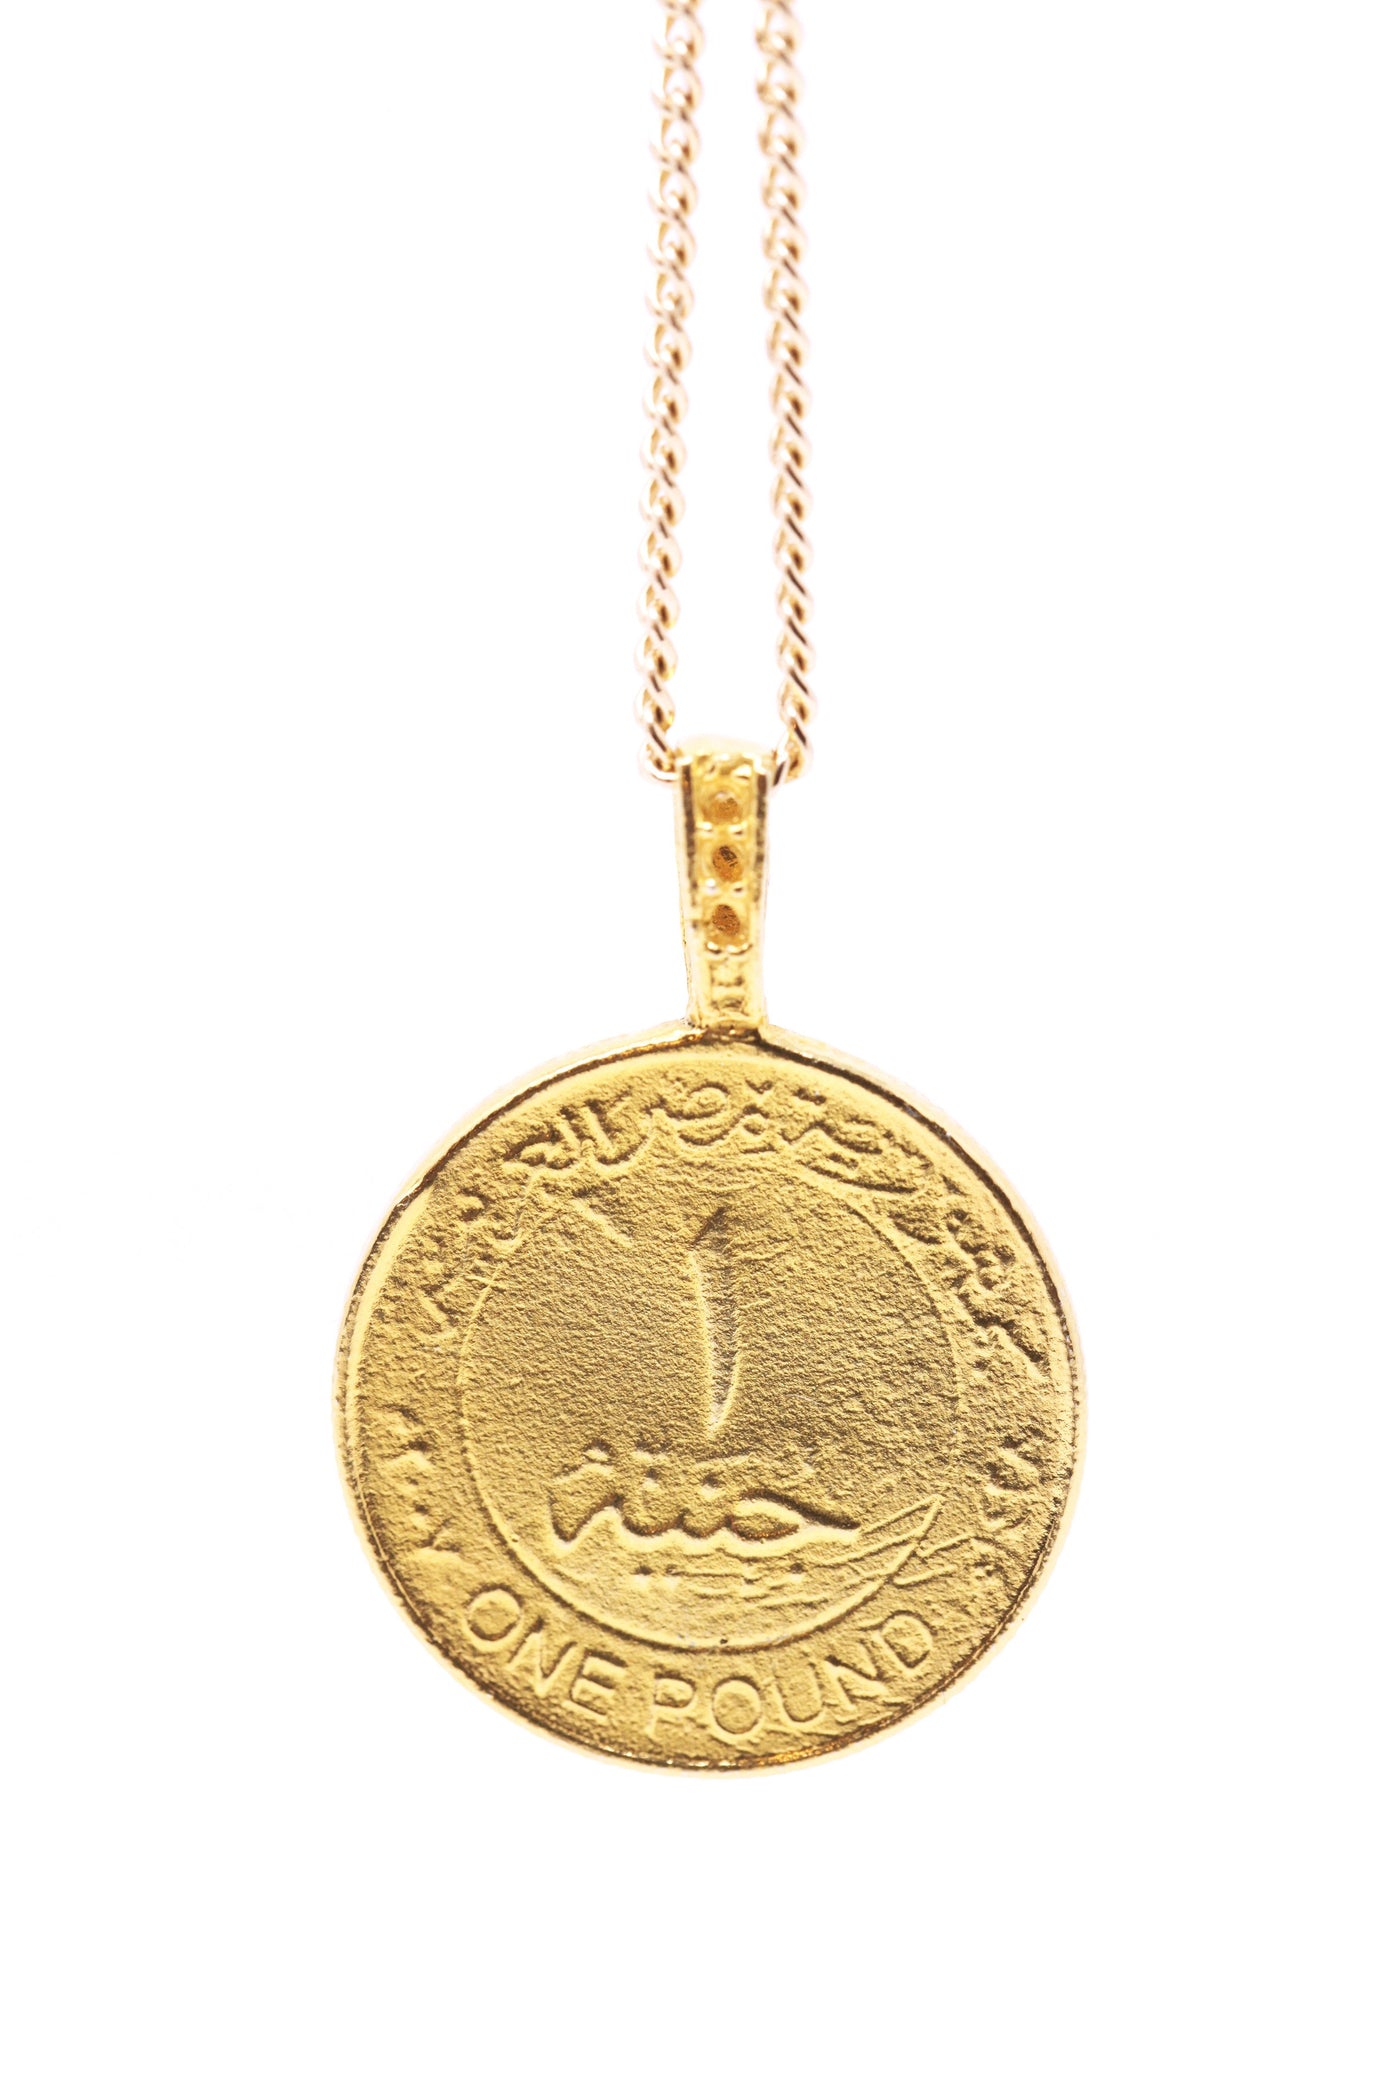 THE KING Tut Coin Necklace - ShopAuthentique